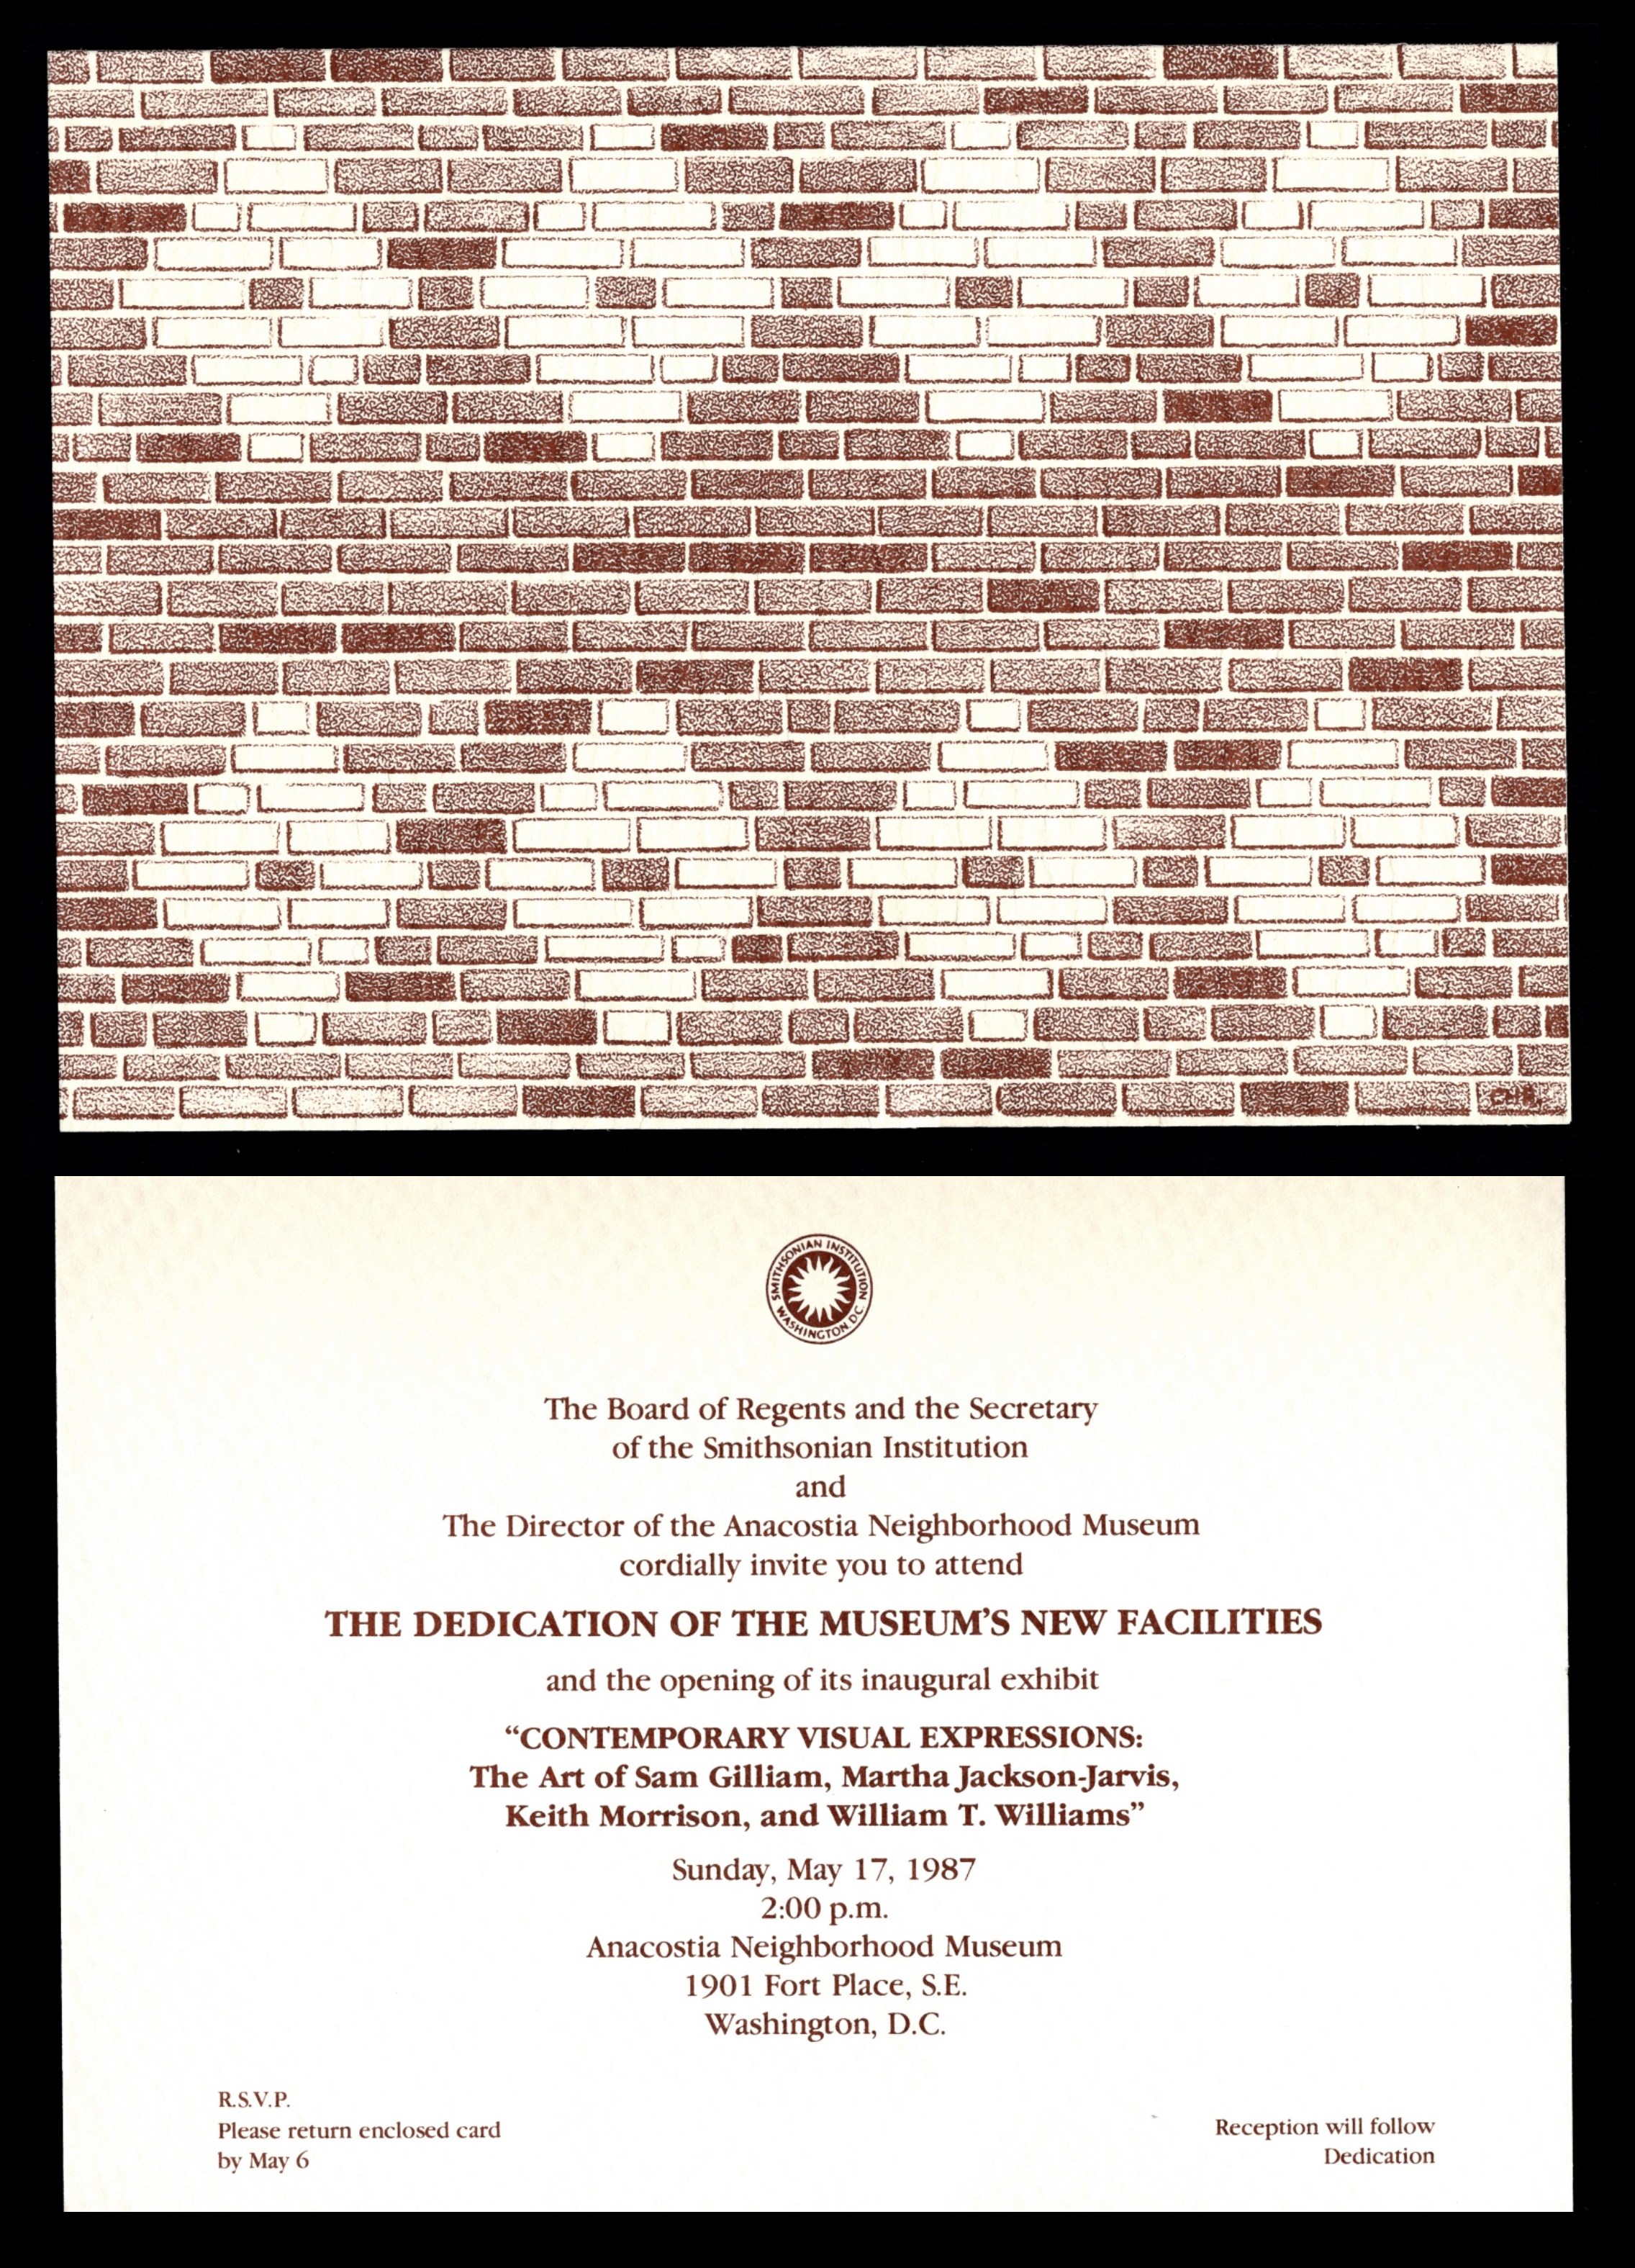 Invitation to the opening of the Anacostia Neighborhood Museum in 1987.